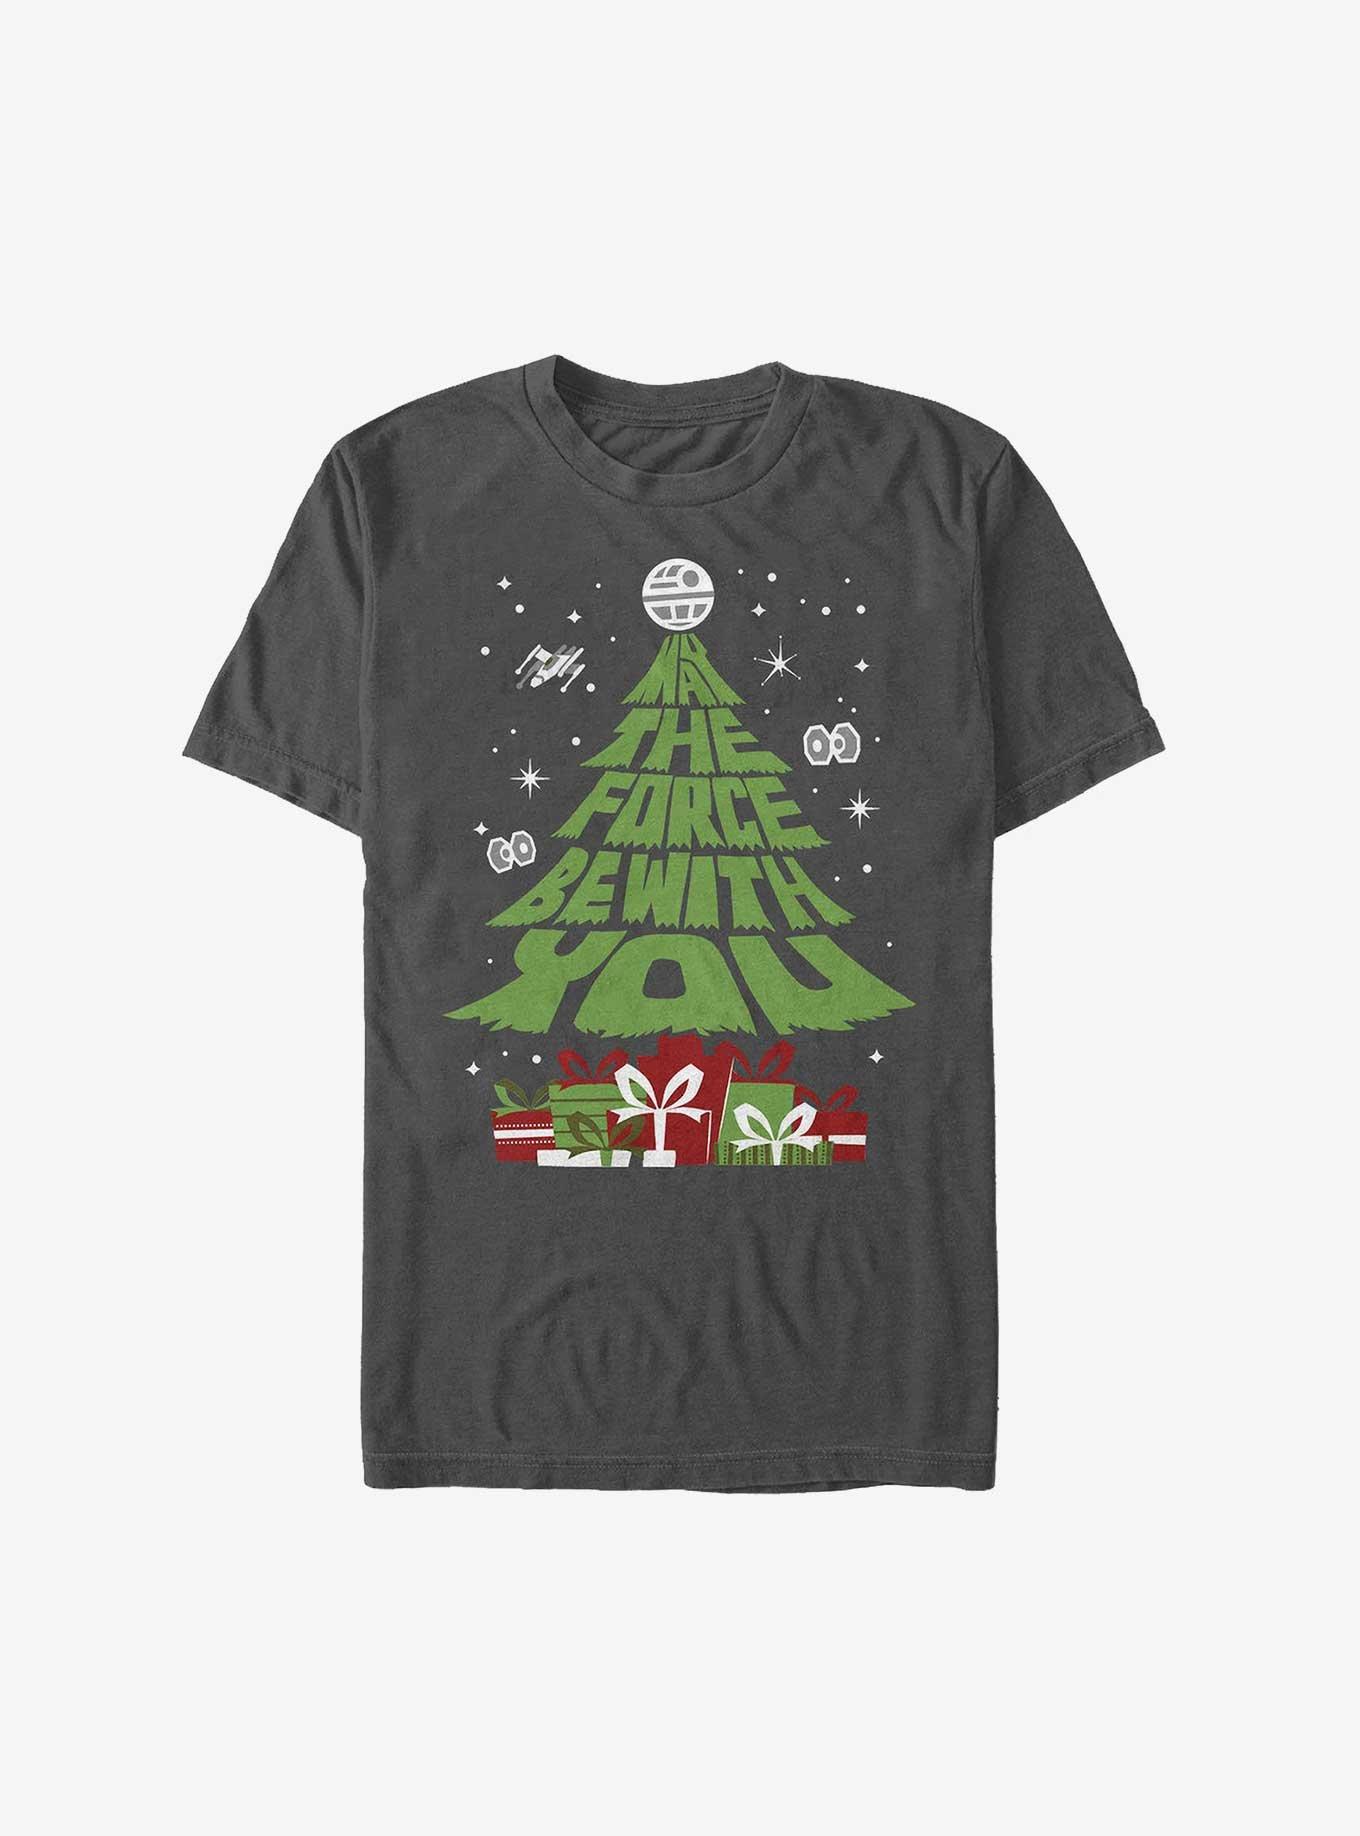 Star Wars May The Force Be WIth You Gift Tree Extra Soft T-Shirt, CHARCOAL, hi-res